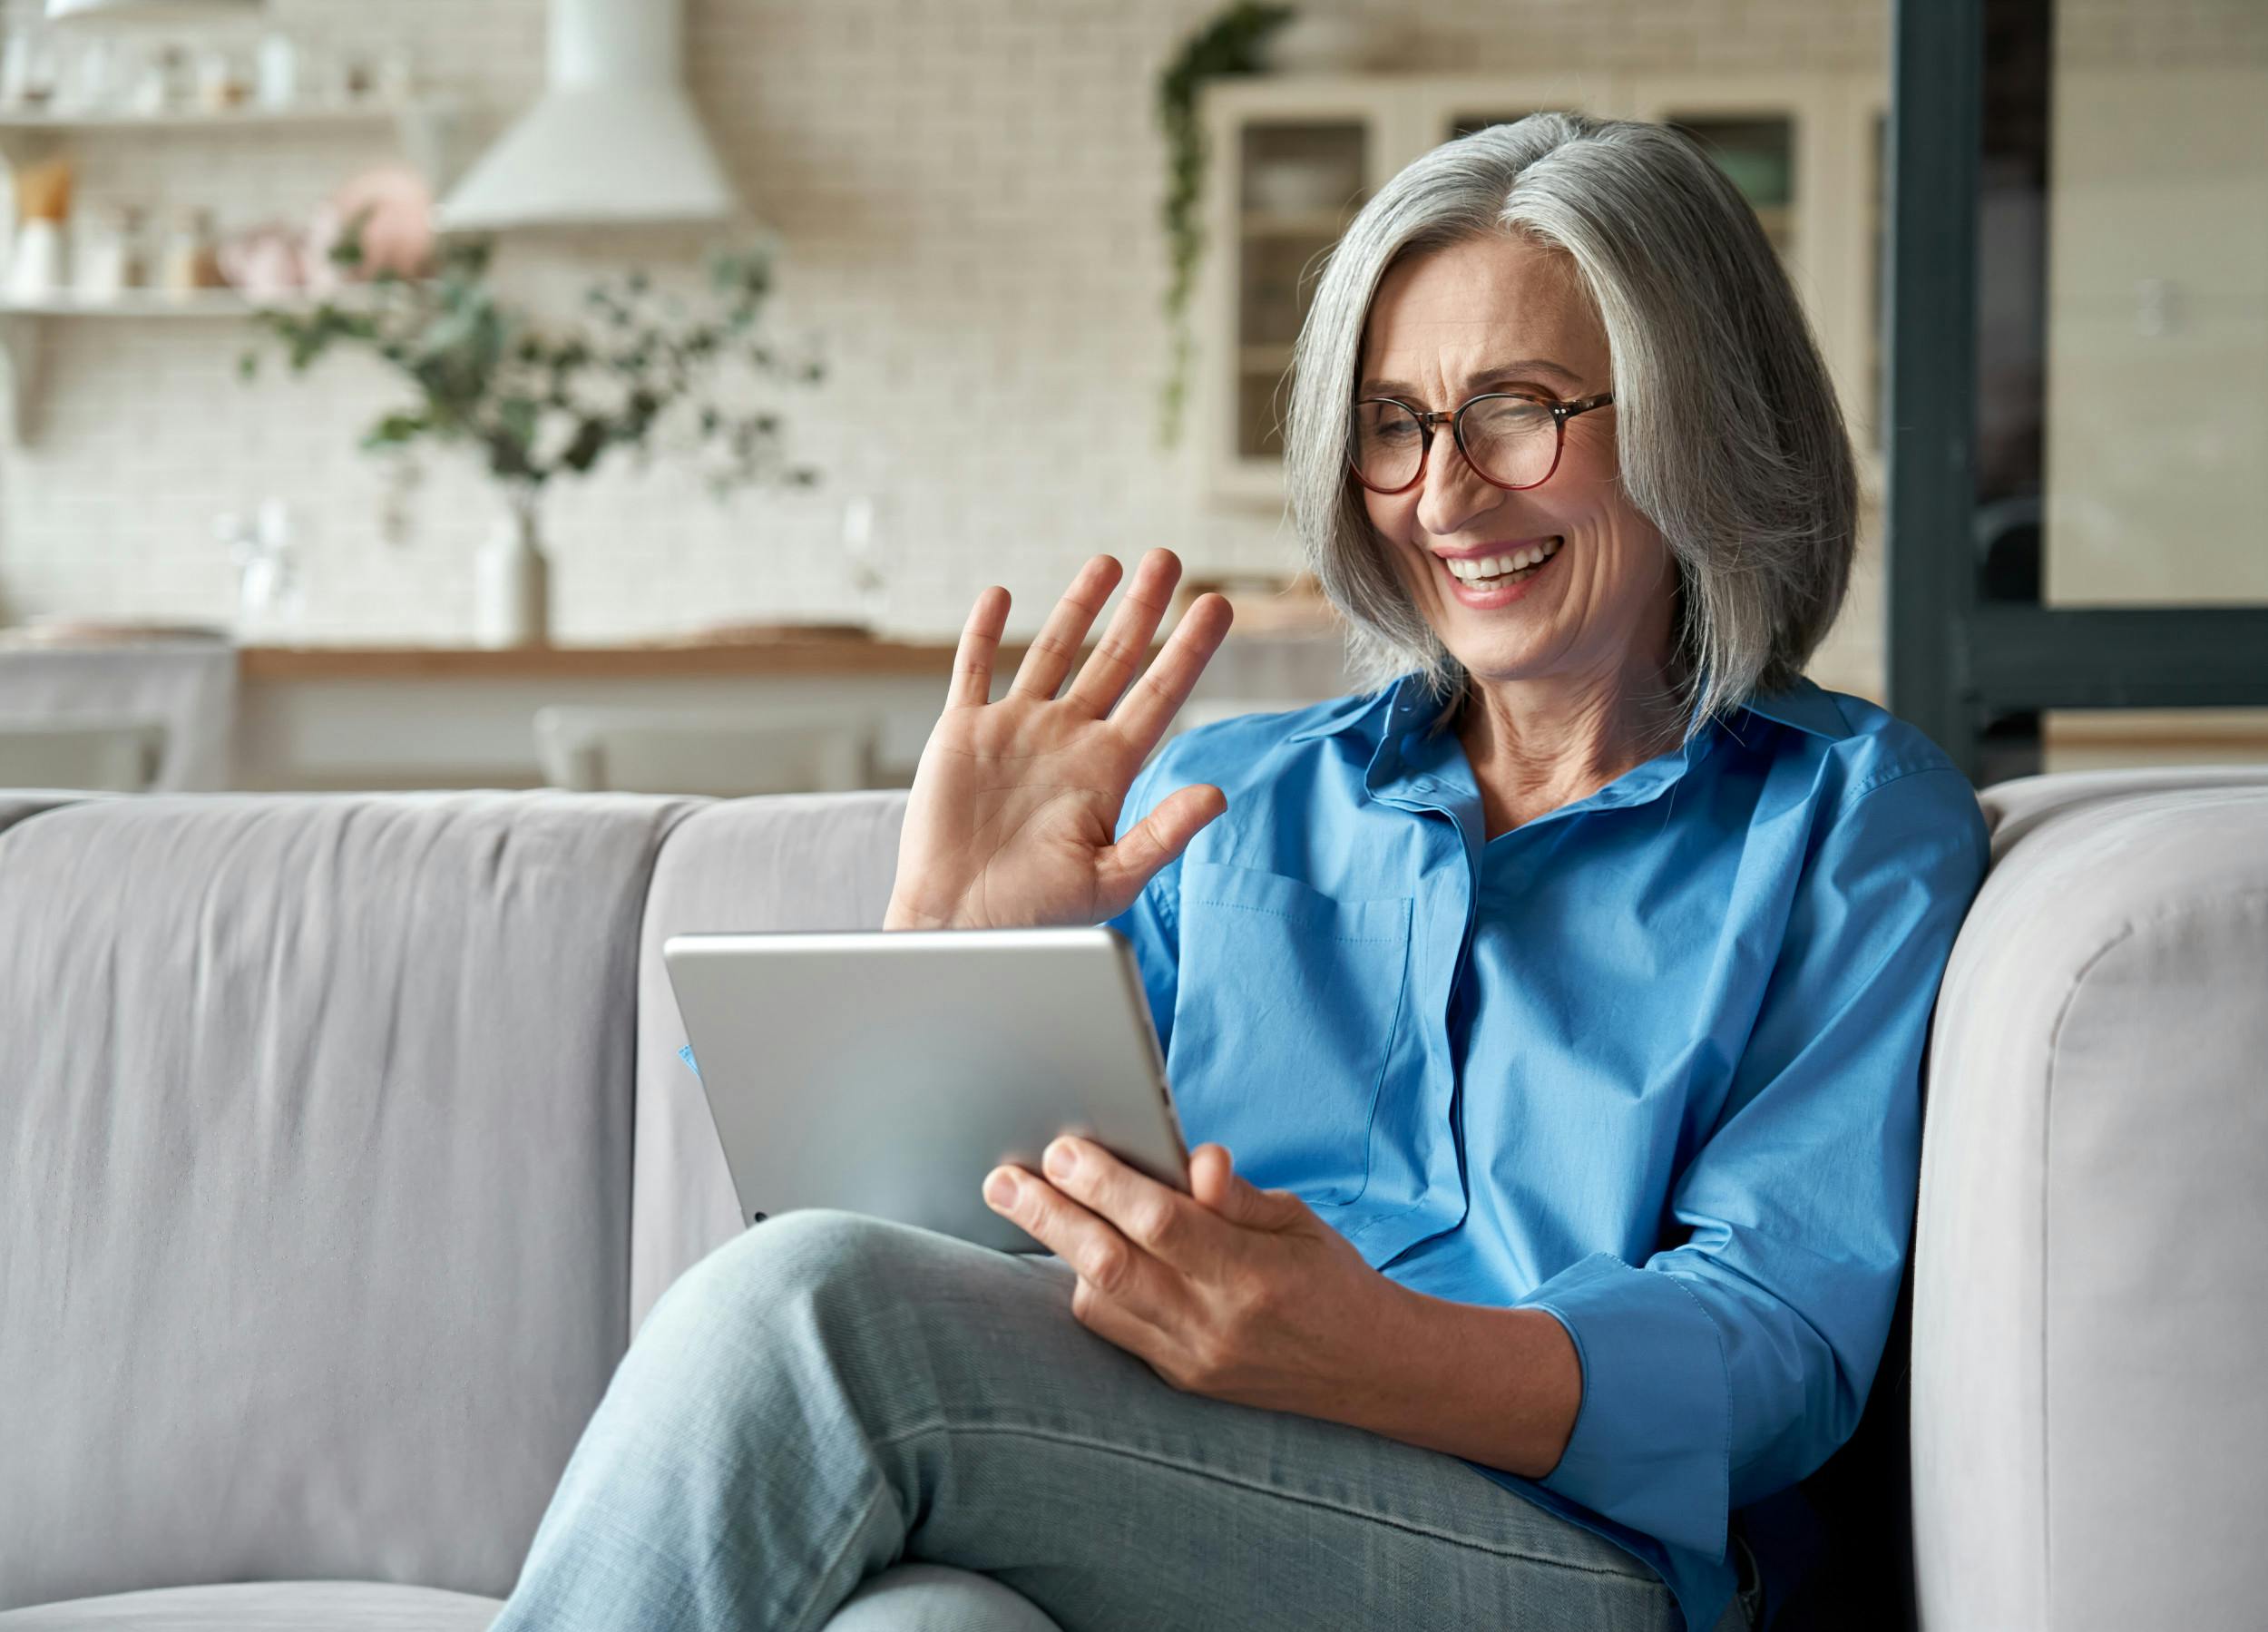 How Broadband Access Impacts Aging Loved Ones